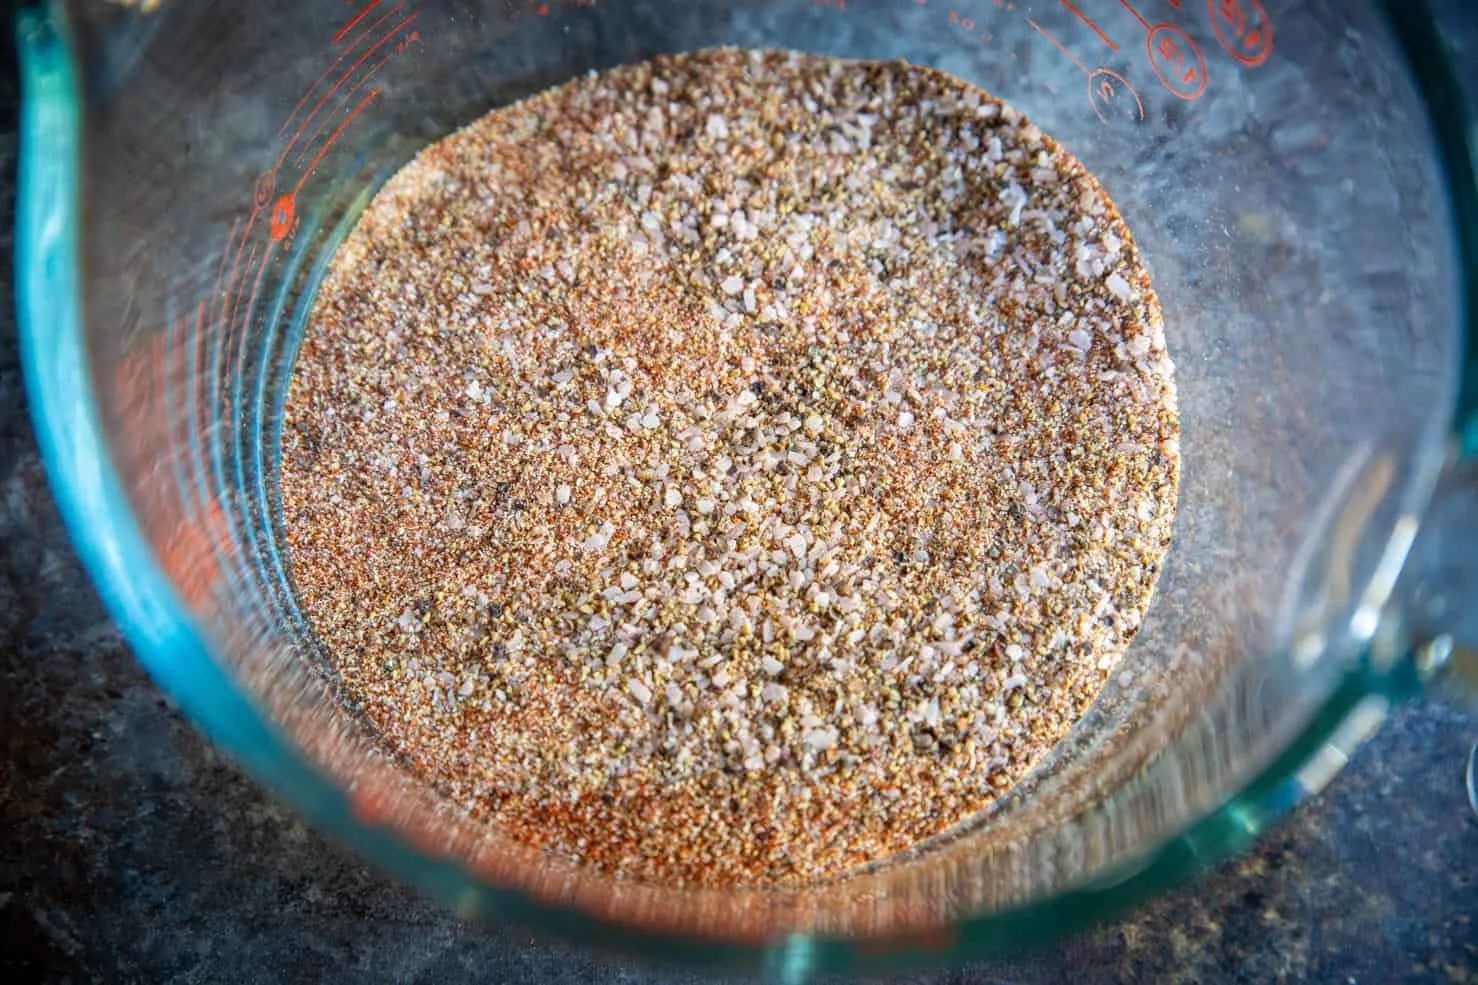 A glass measuring cup full of mixed spices which create the carne asada rub.